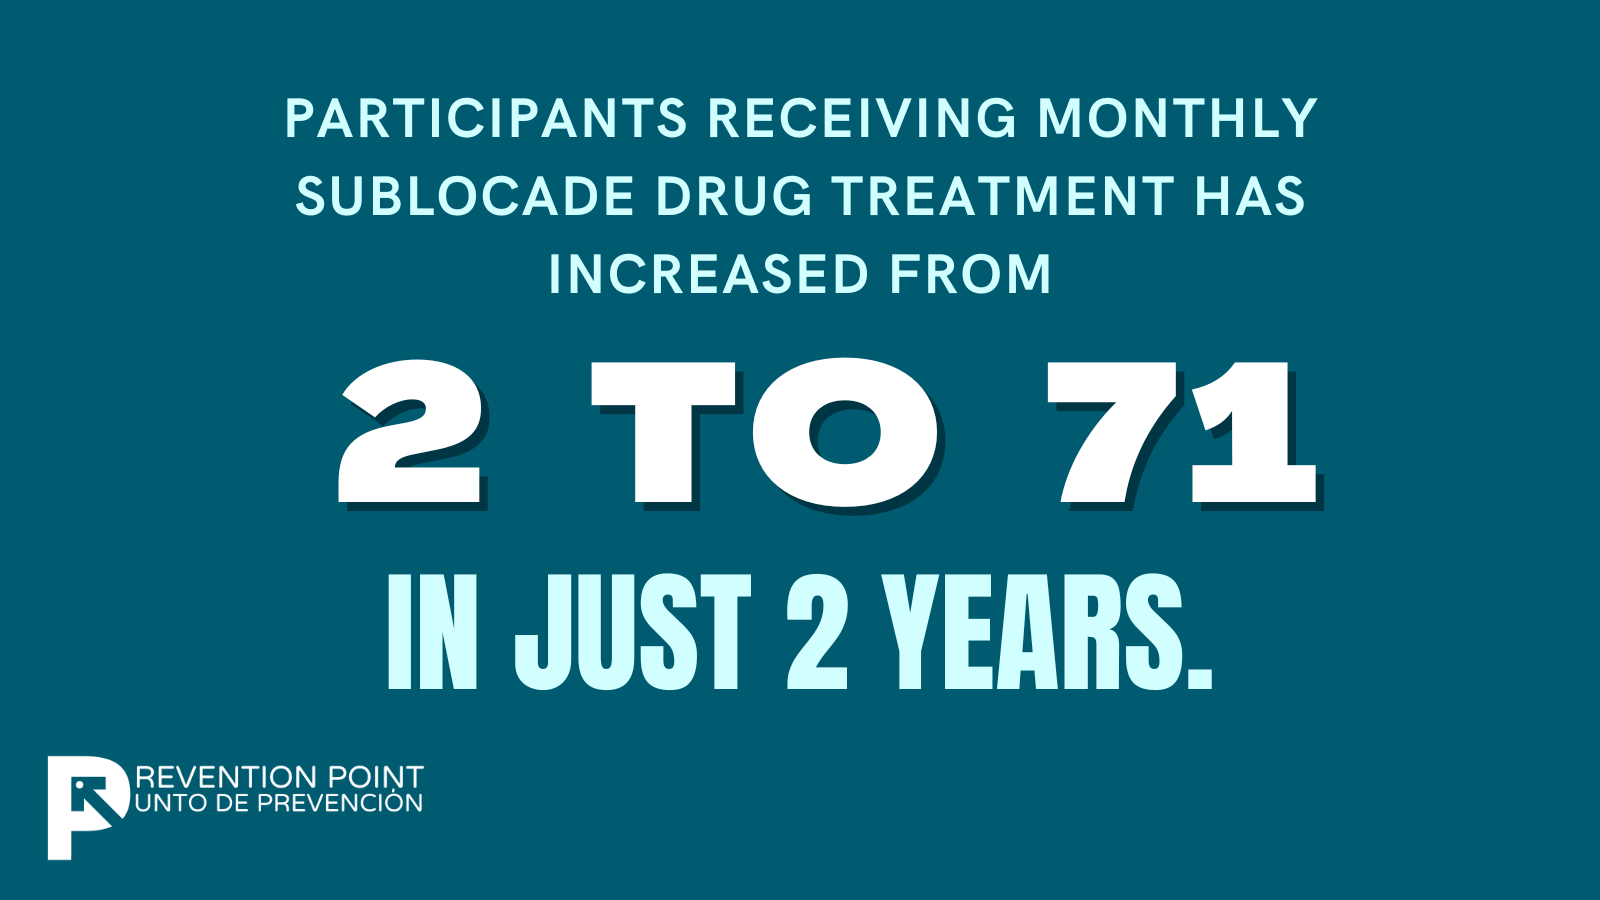 Sublocade drug treatment patients went from 2 to 71 in 2 years